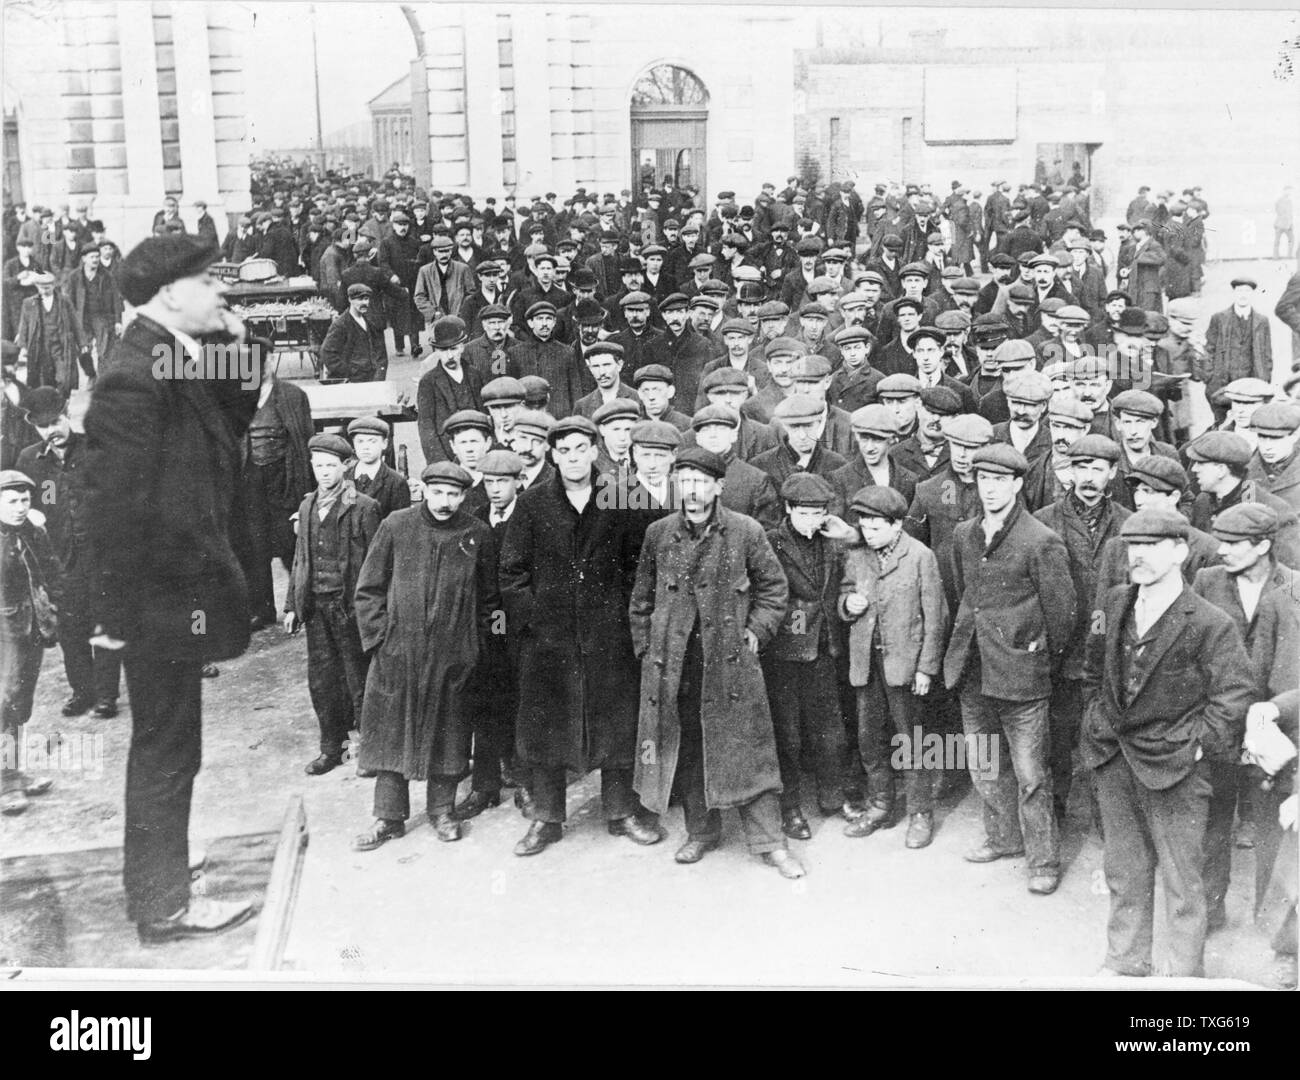 Open air election meeting in Portsmouth Docks, England, 1910s. Stock Photo